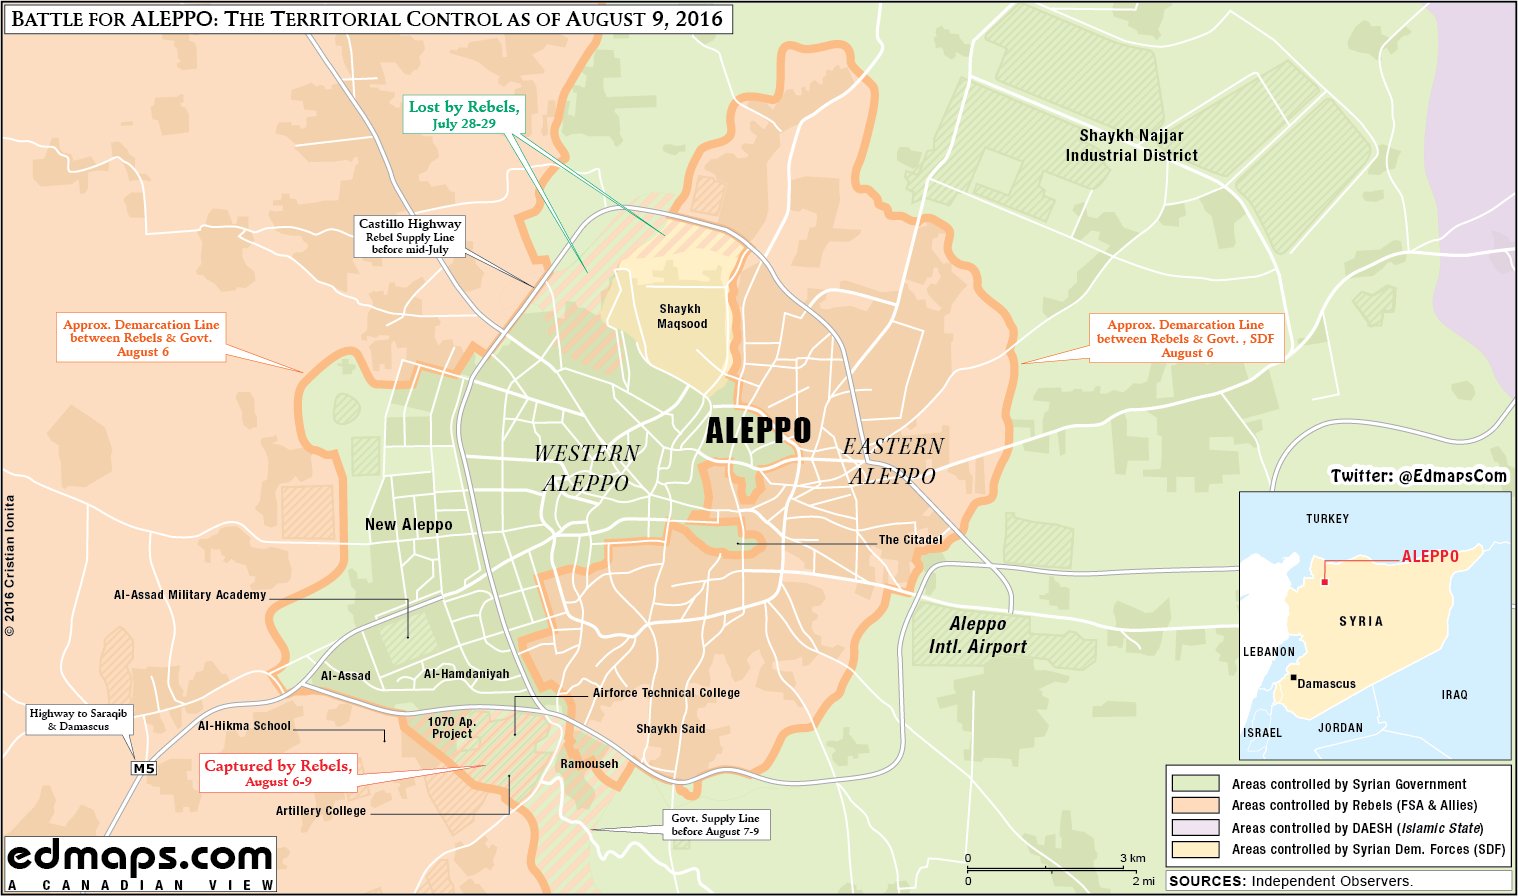 Overview of Military Situation in Aleppo City on August 10